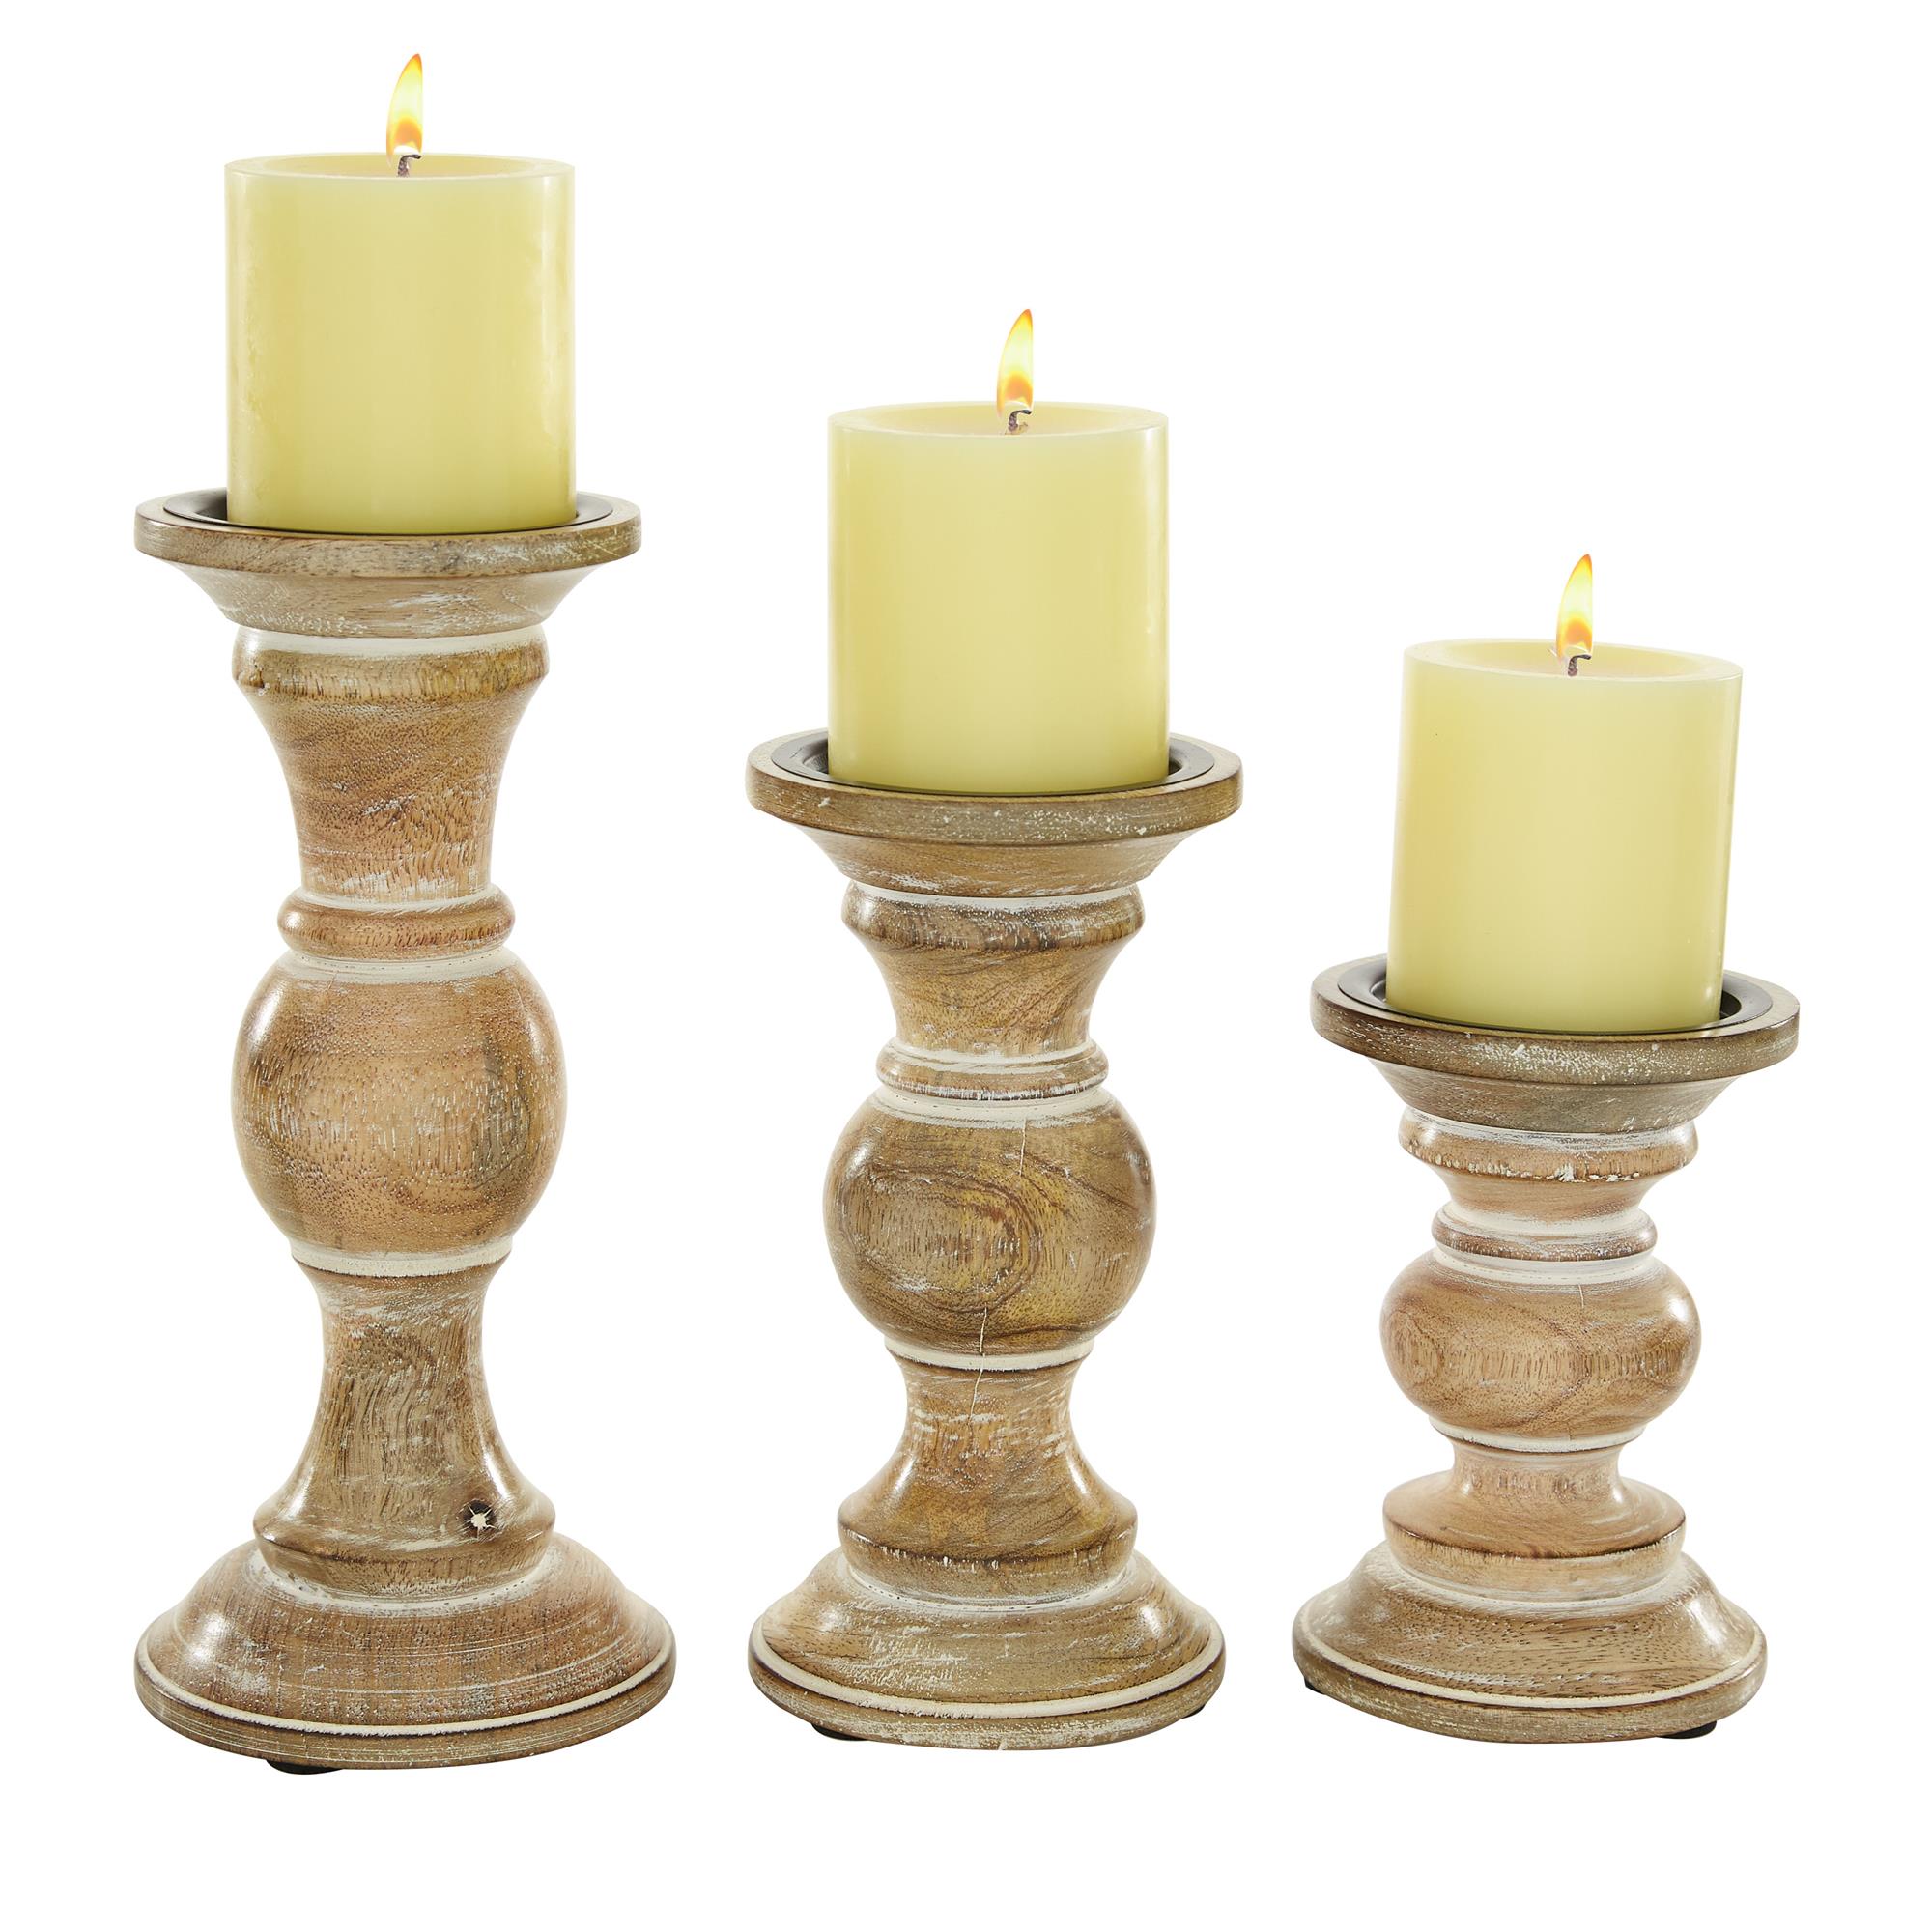 Set of 3 11 by 9 by 8-Inch Deco 79 Metal Rope Candle Holder 